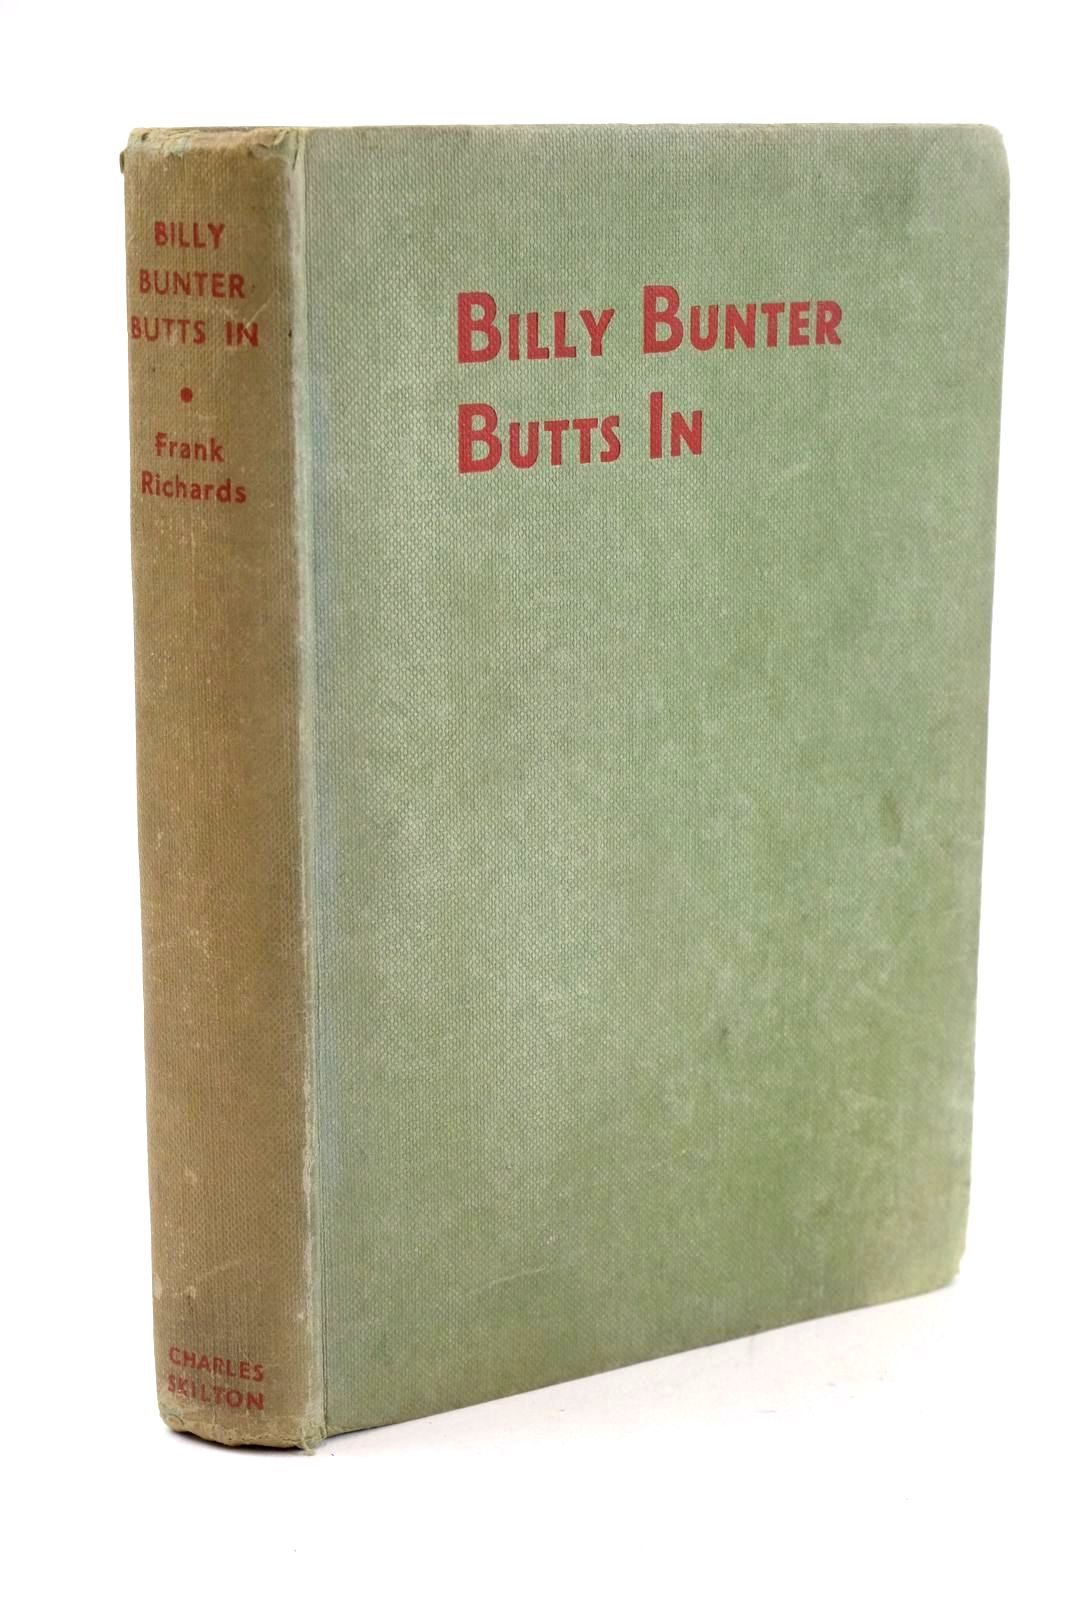 Photo of BILLY BUNTER BUTTS IN- Stock Number: 1324113